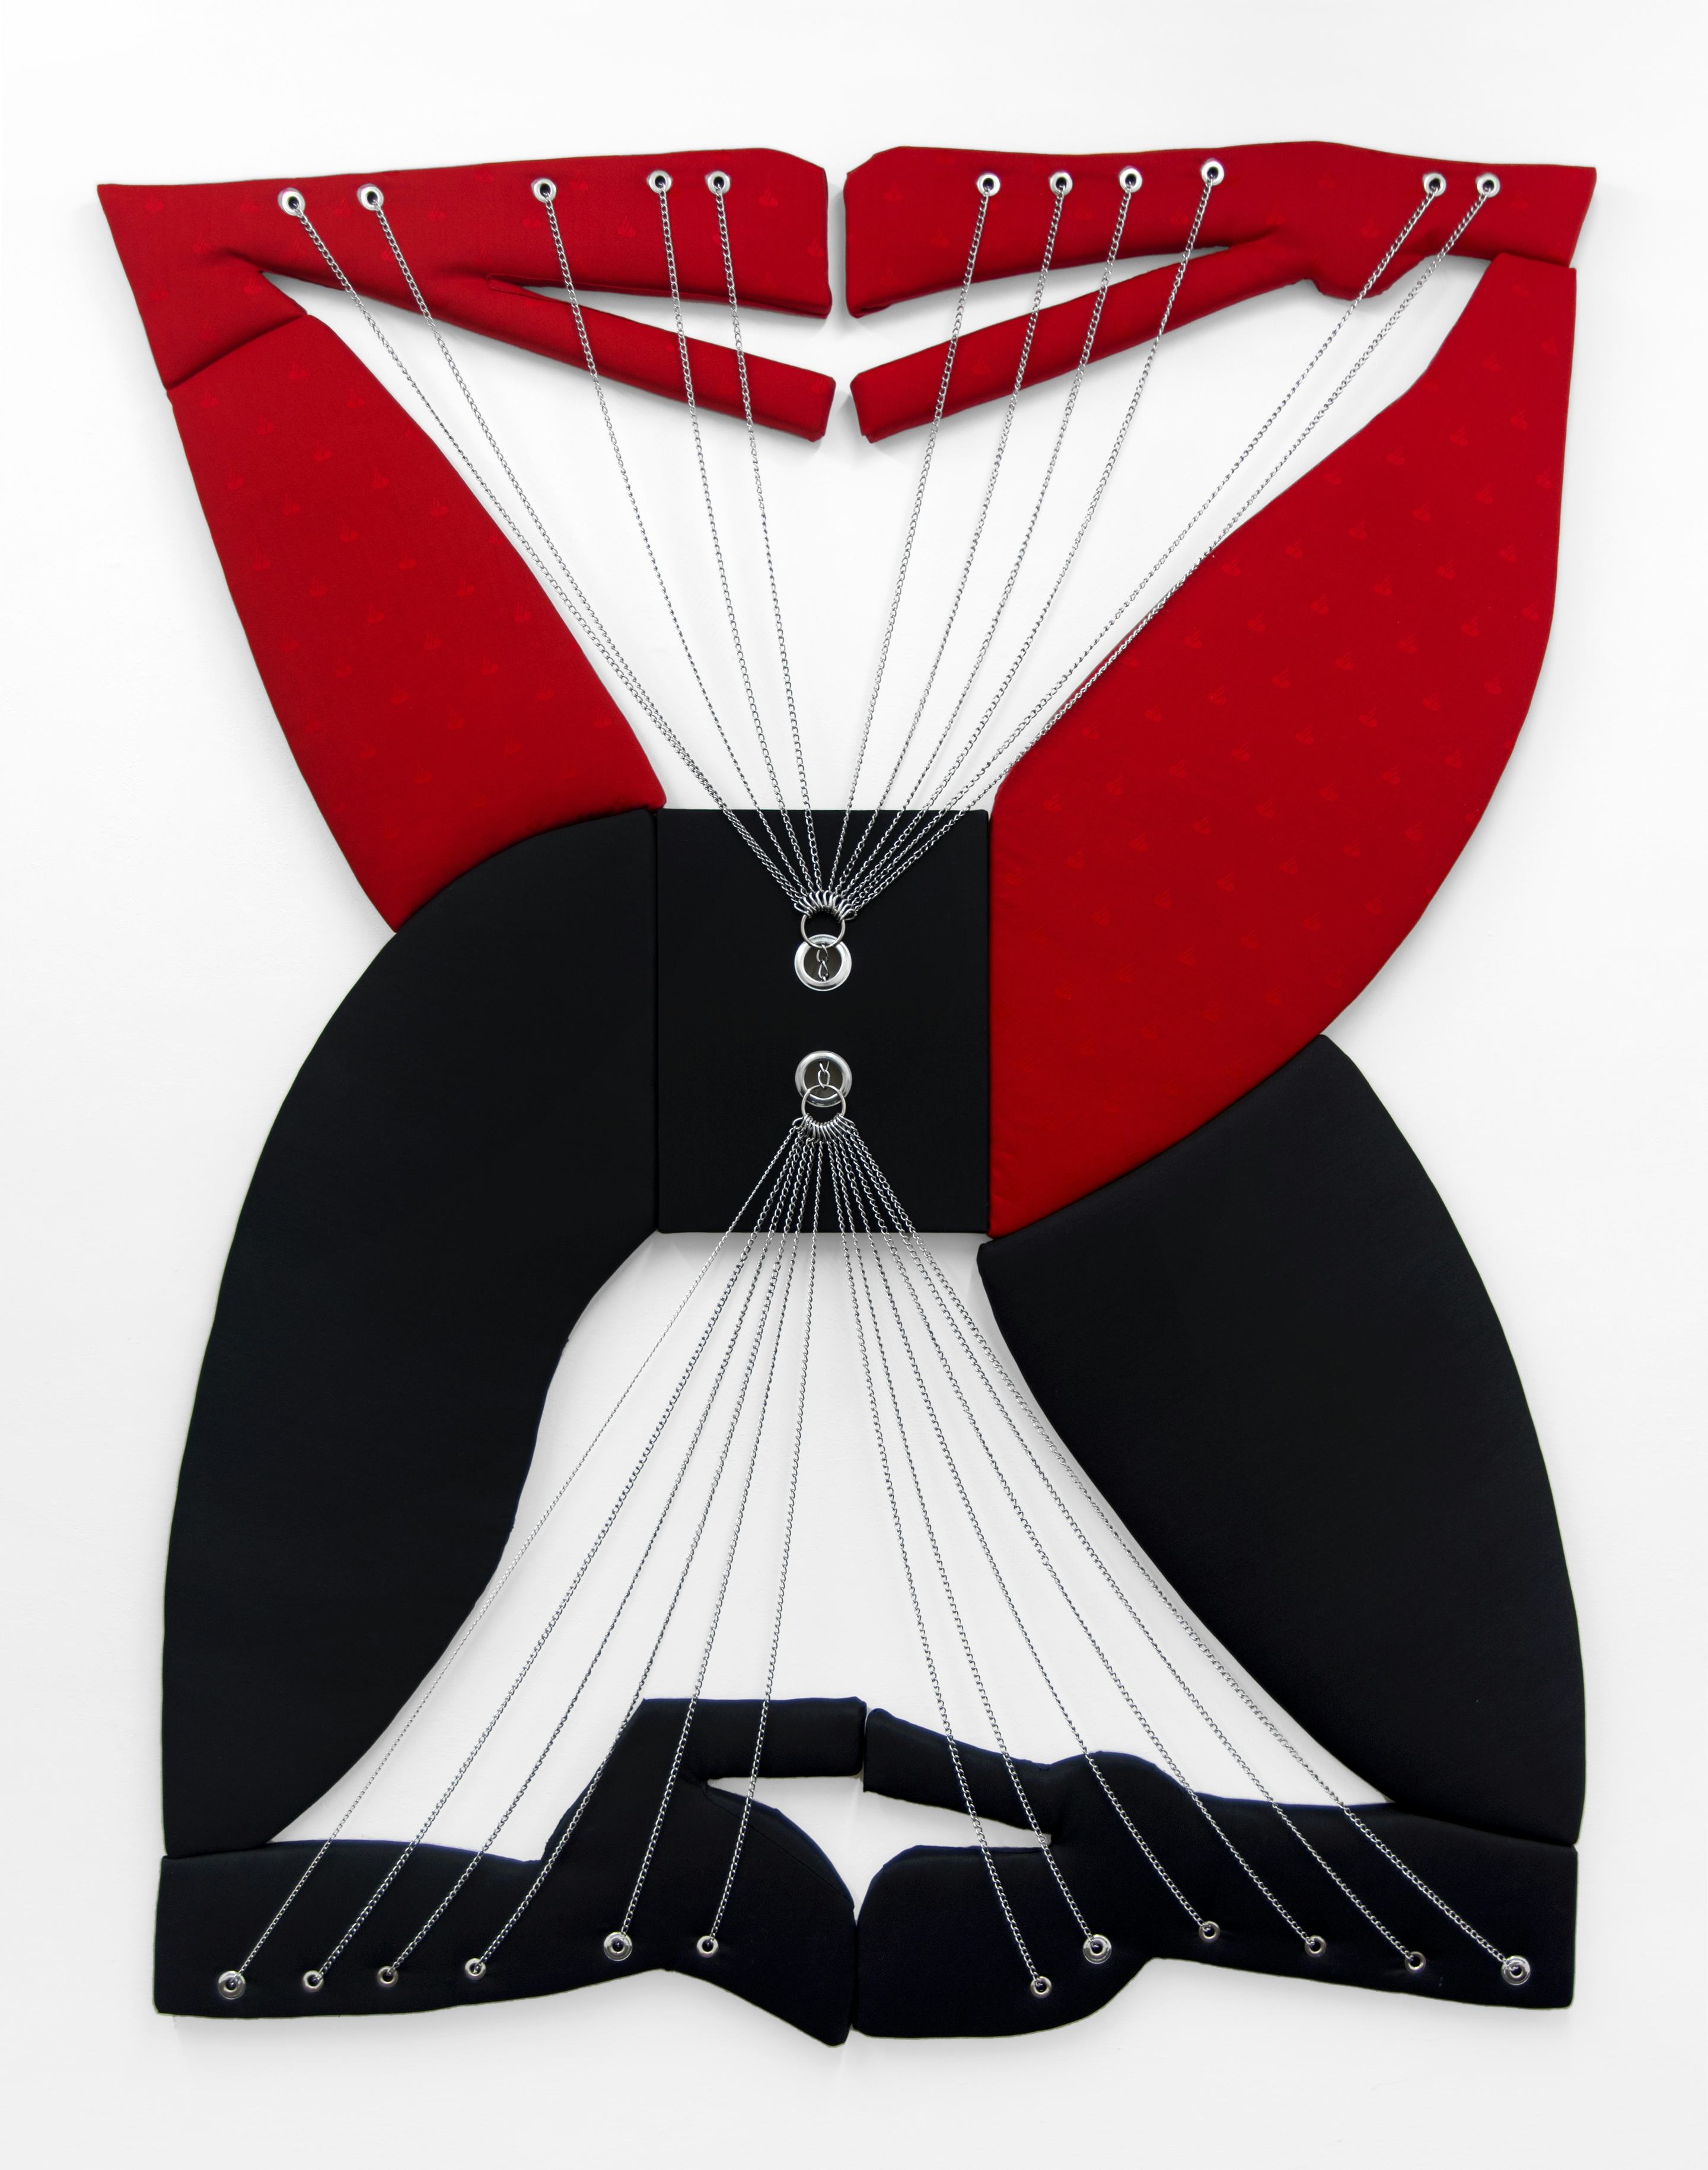 Black Widow Anarchist Hour Glass (2018)
Fabric, canvas, hardware, chain on shaped panel
78h × 60w inches (198.12h × 152.4w cm)